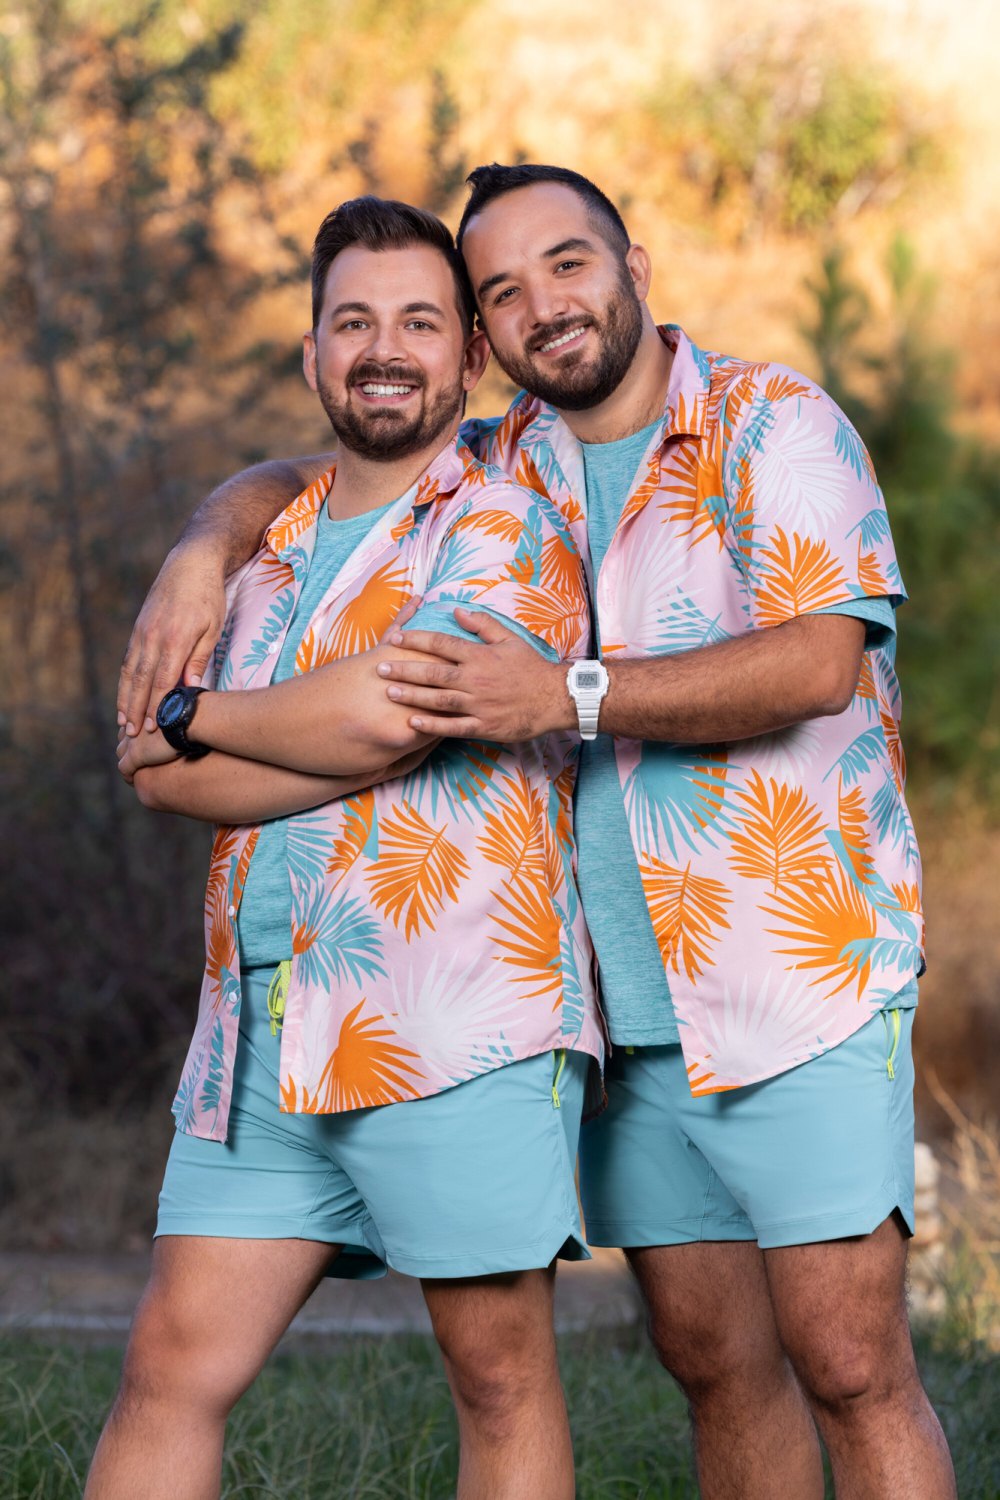 The Amazing Race’s Ricky and Cesar Thought They’d Be ‘Underdogs’